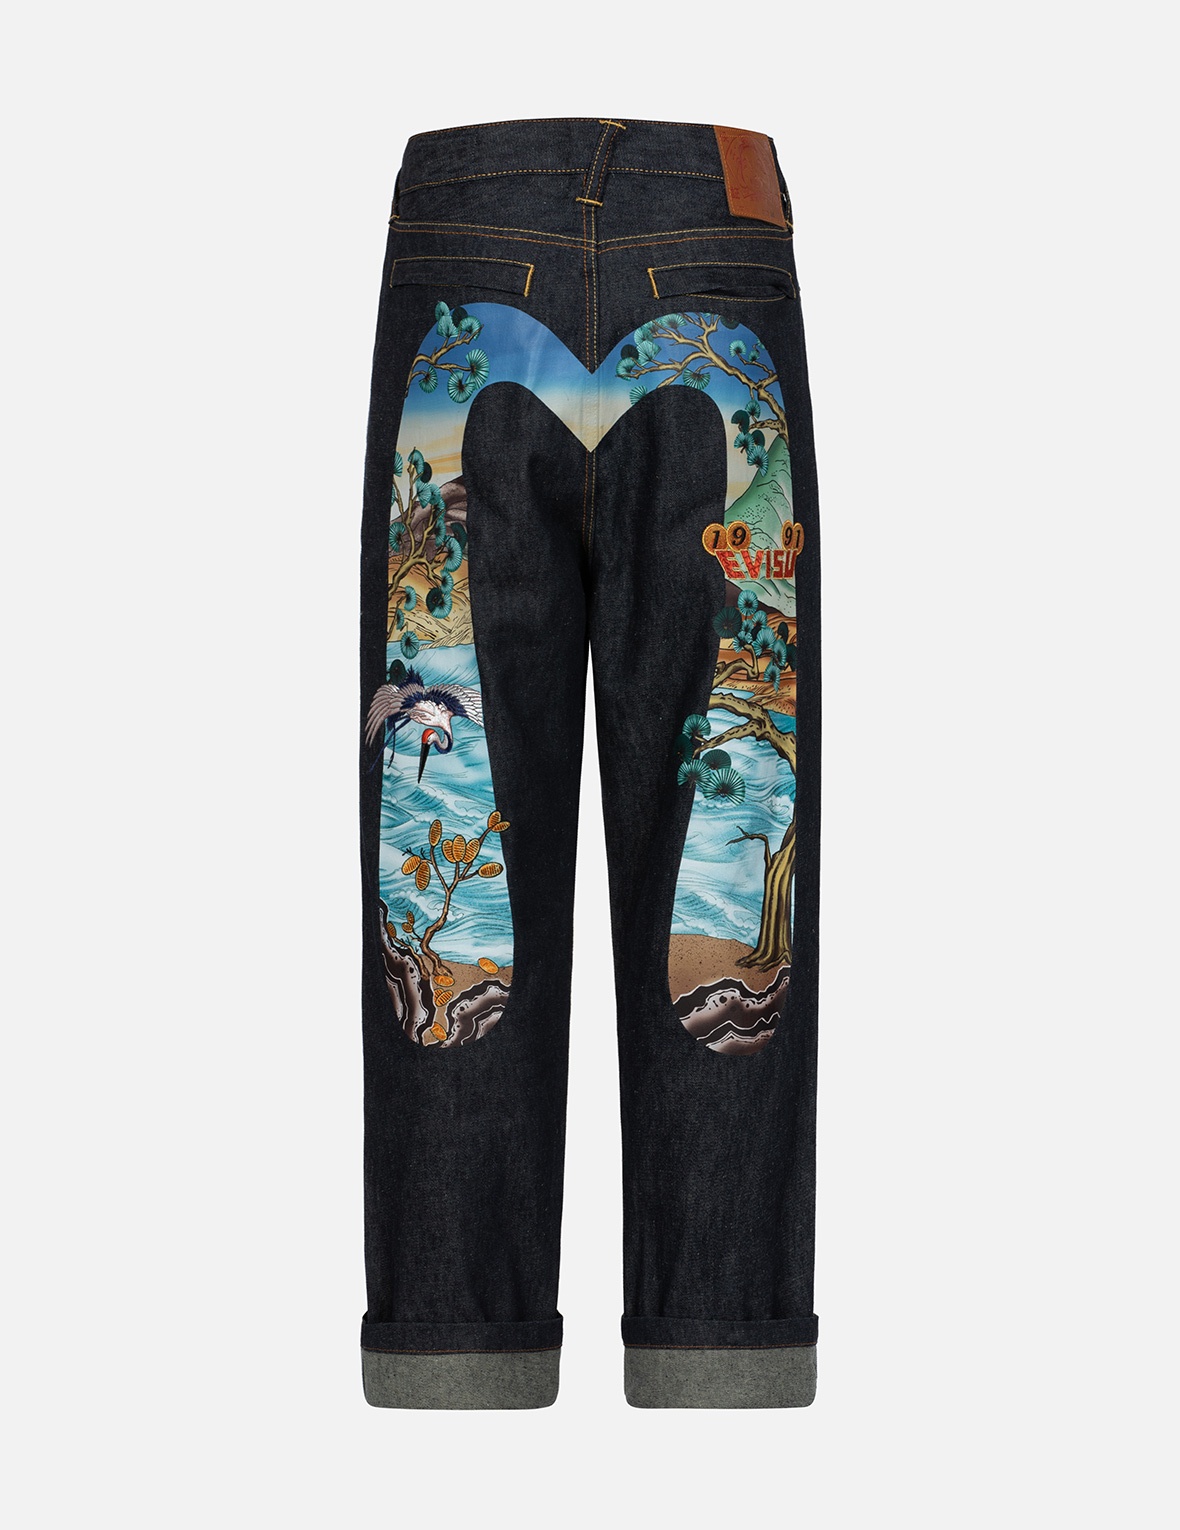 PINE-PATTERN DAICOCK PRINT WITH CRANE AND LOGO EMBROIDERY WIDE LEG JEANS - 1